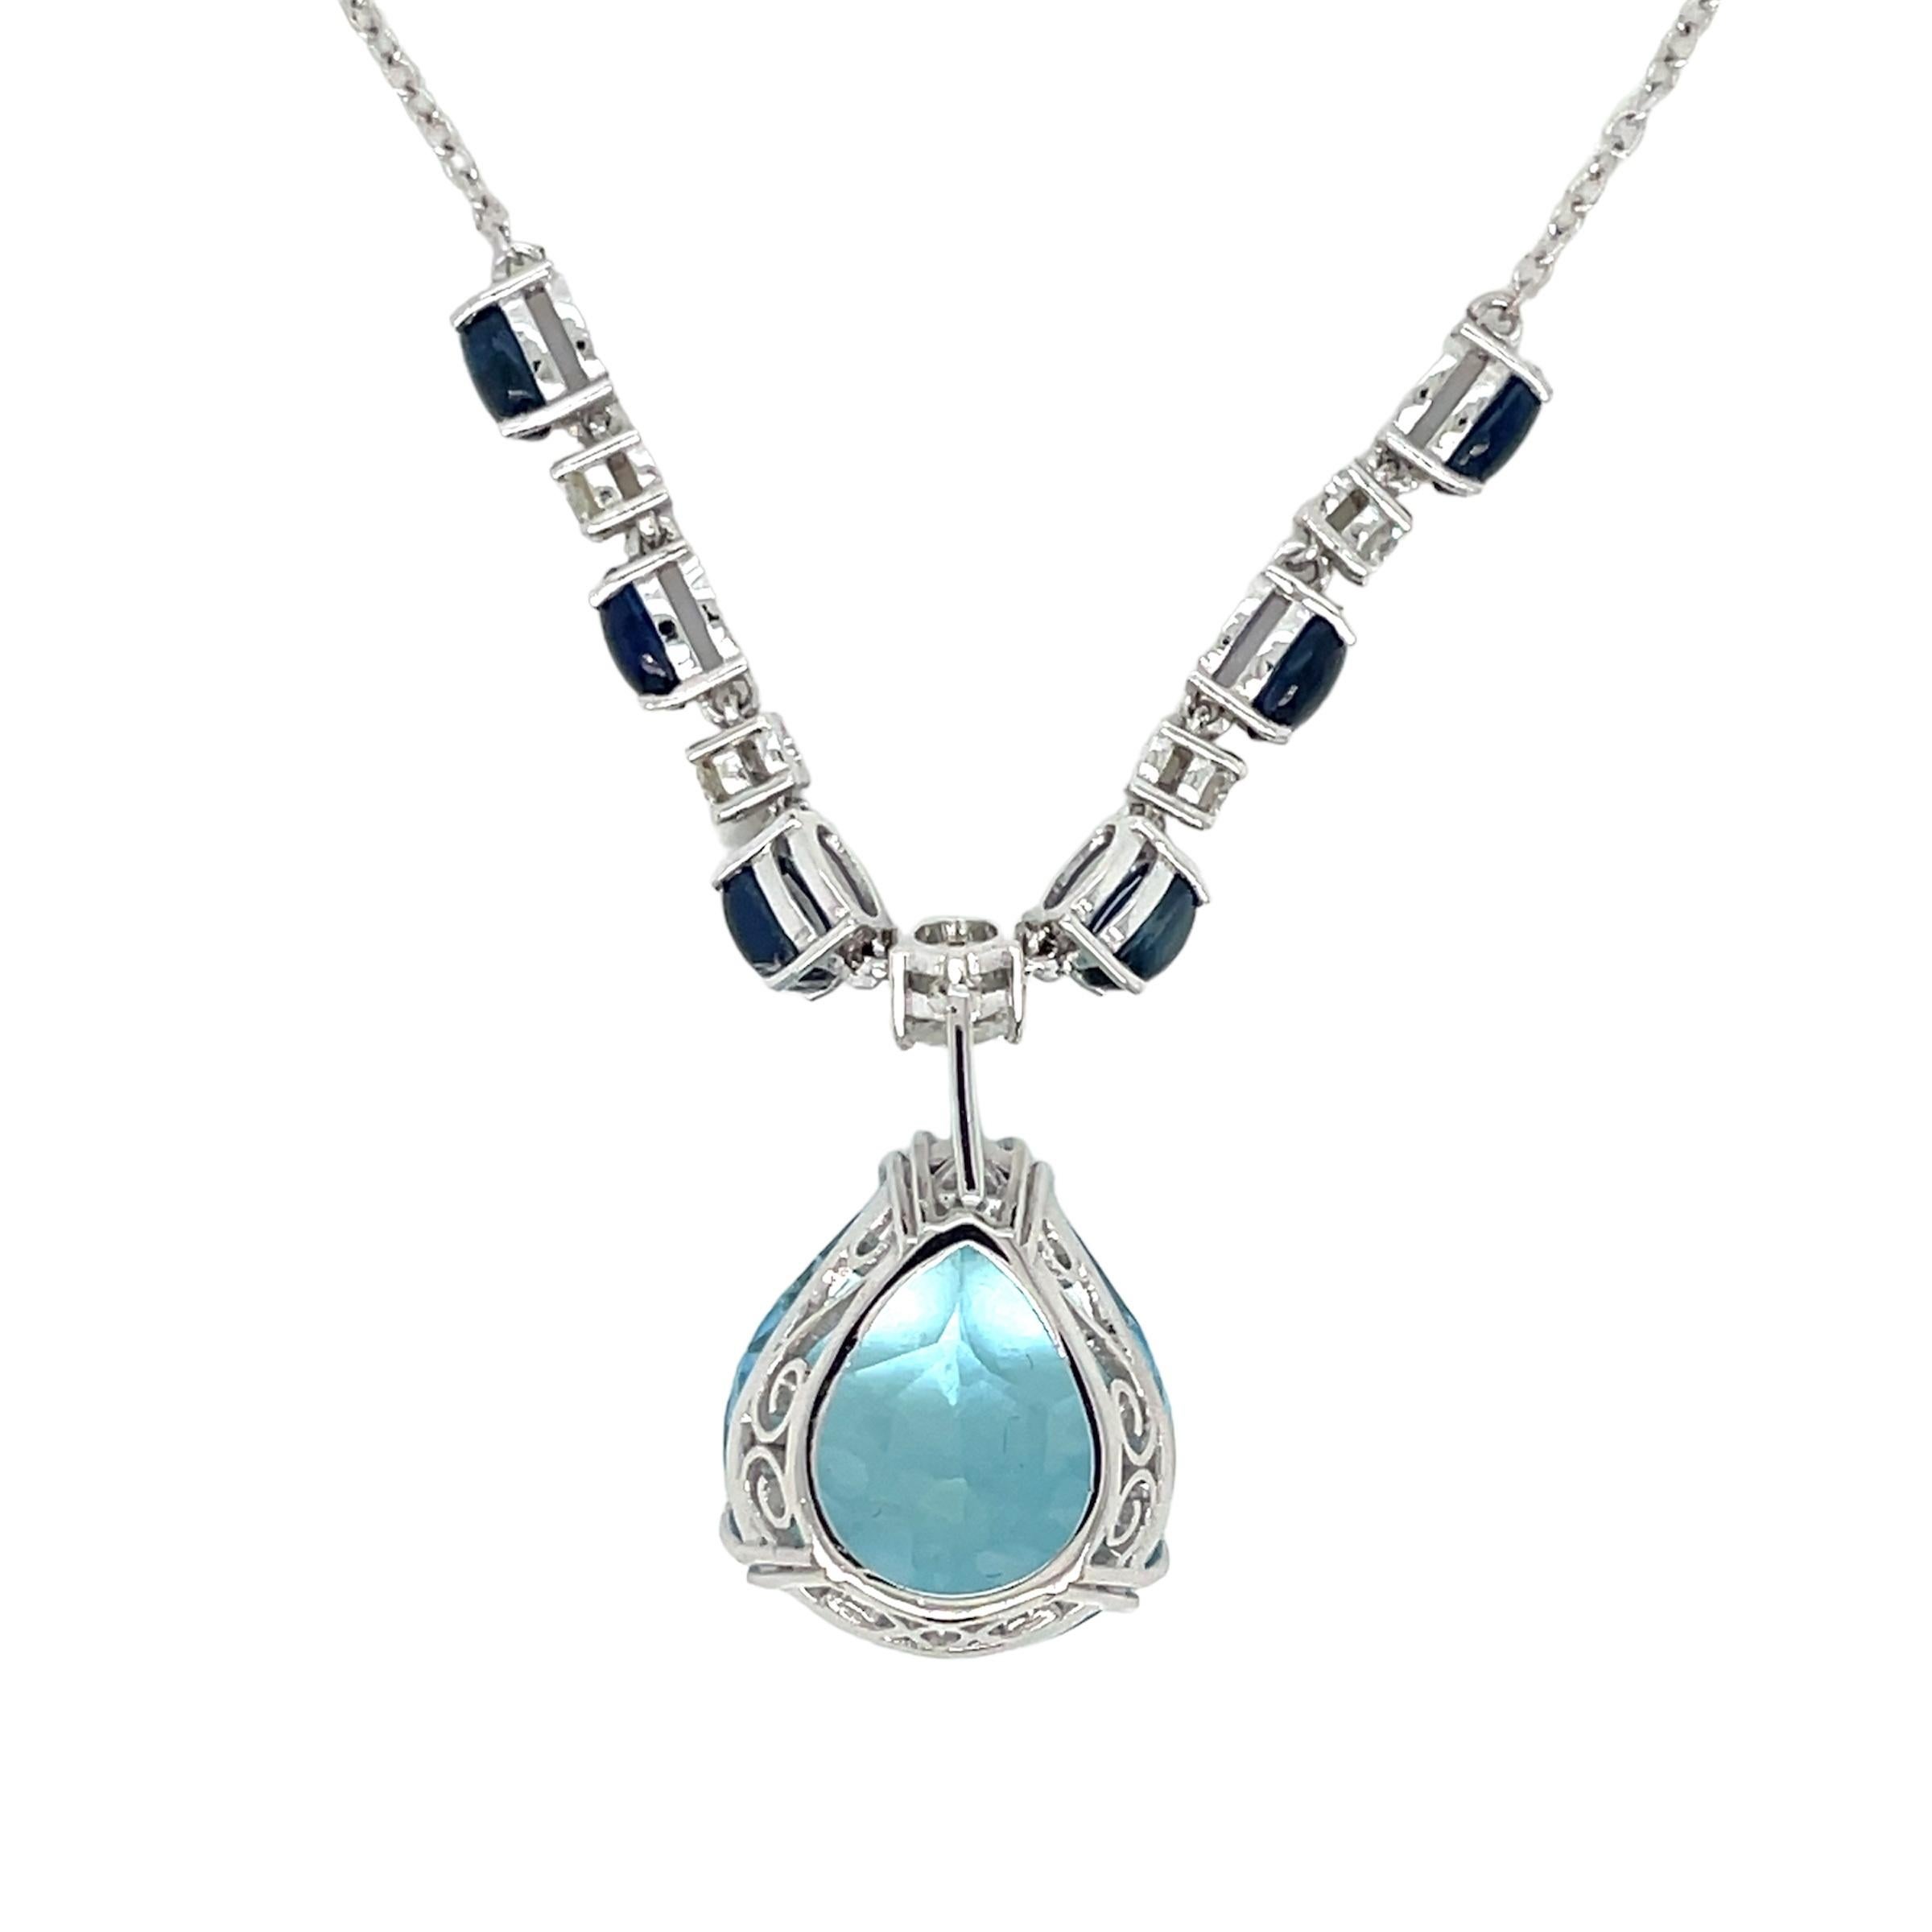 Vintage 12 Carat Aquamarine Diamond Sapphire Pendant Necklace In Excellent Condition For Sale In Napoli, Italy